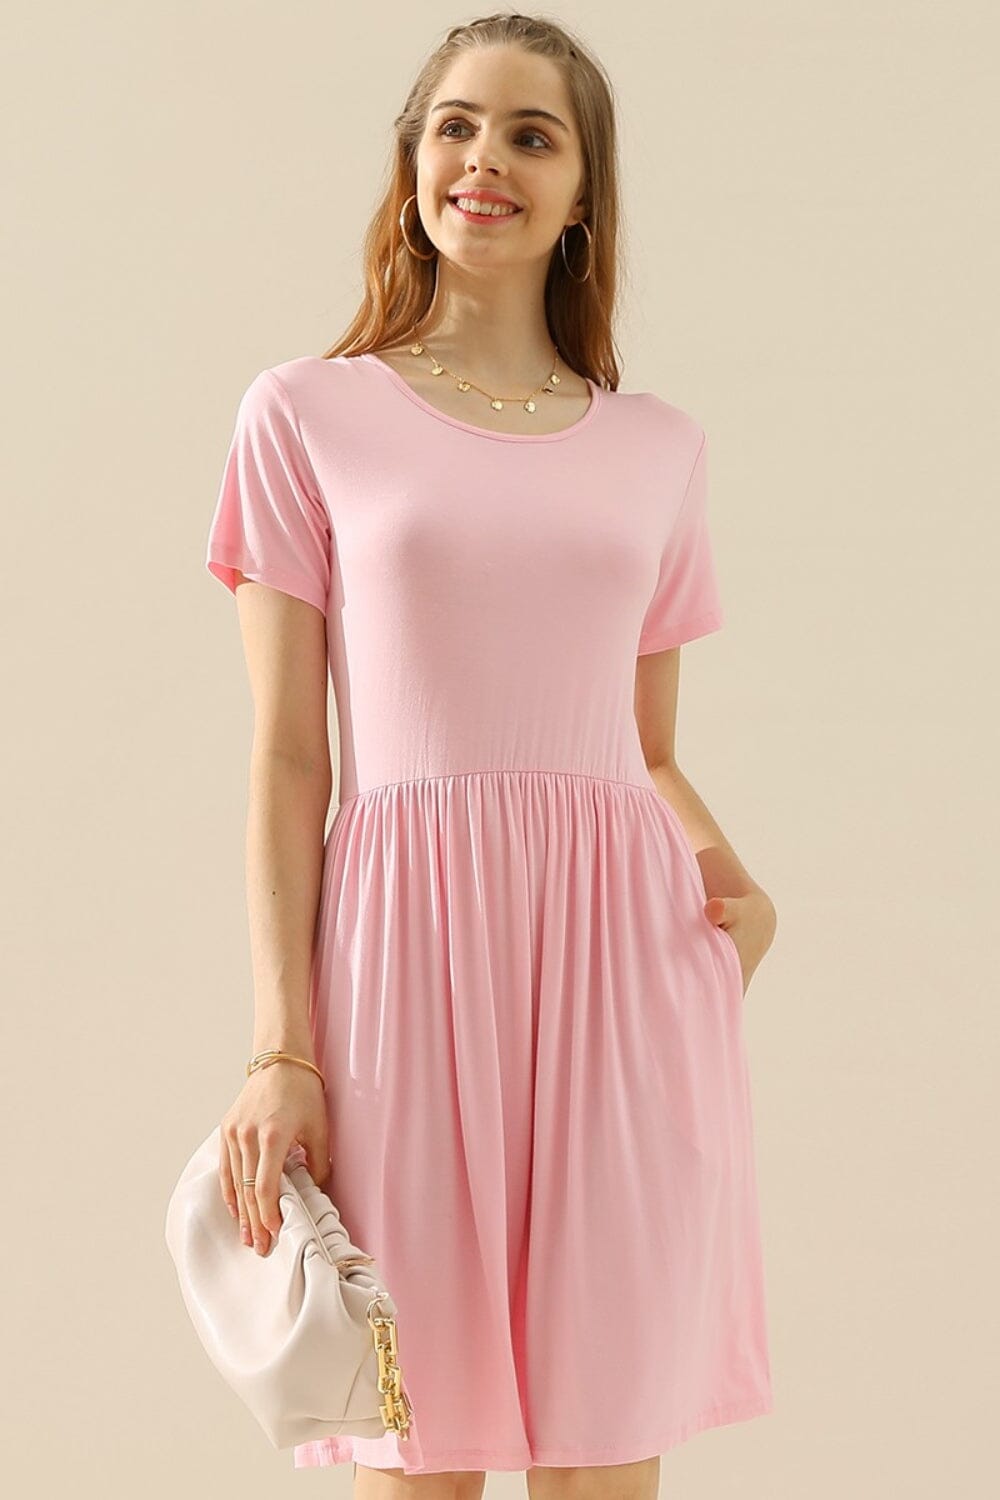 Ninexis Round Neck Ruched Dress with Pockets Dresses jehouze LT PINK S 